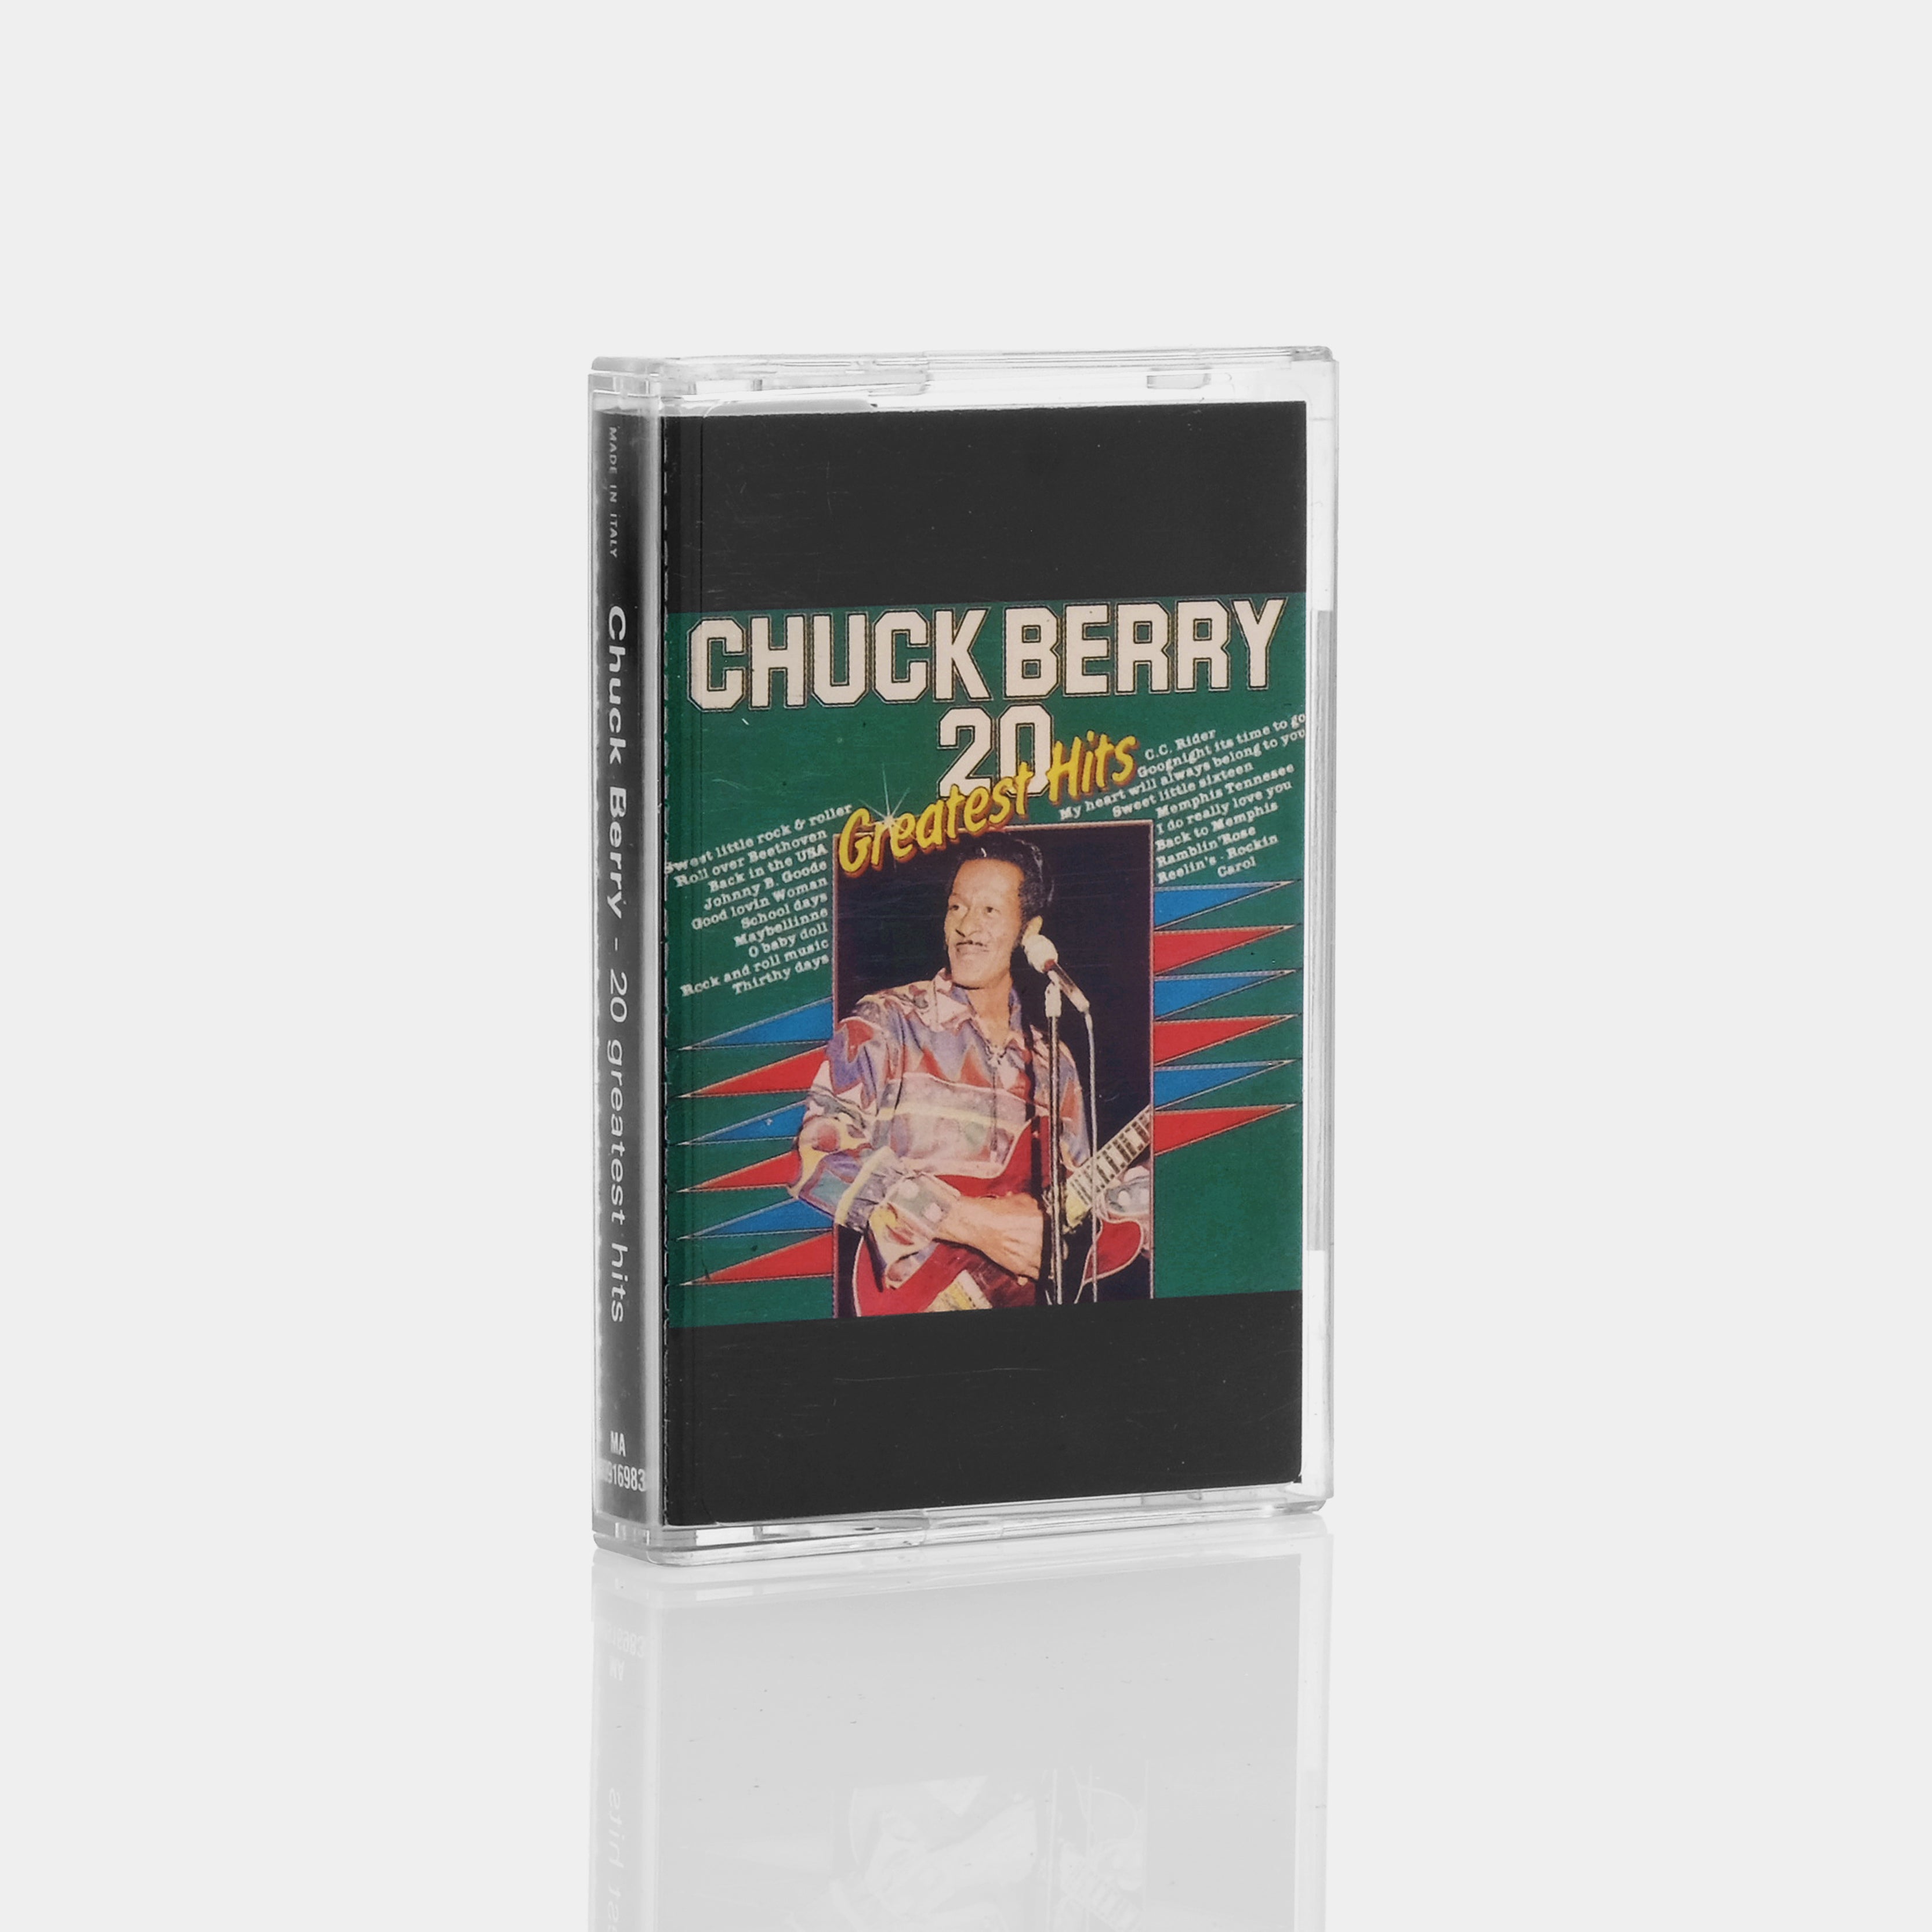 Chuck Berry - 20 Greatest Hits Cassette Tape